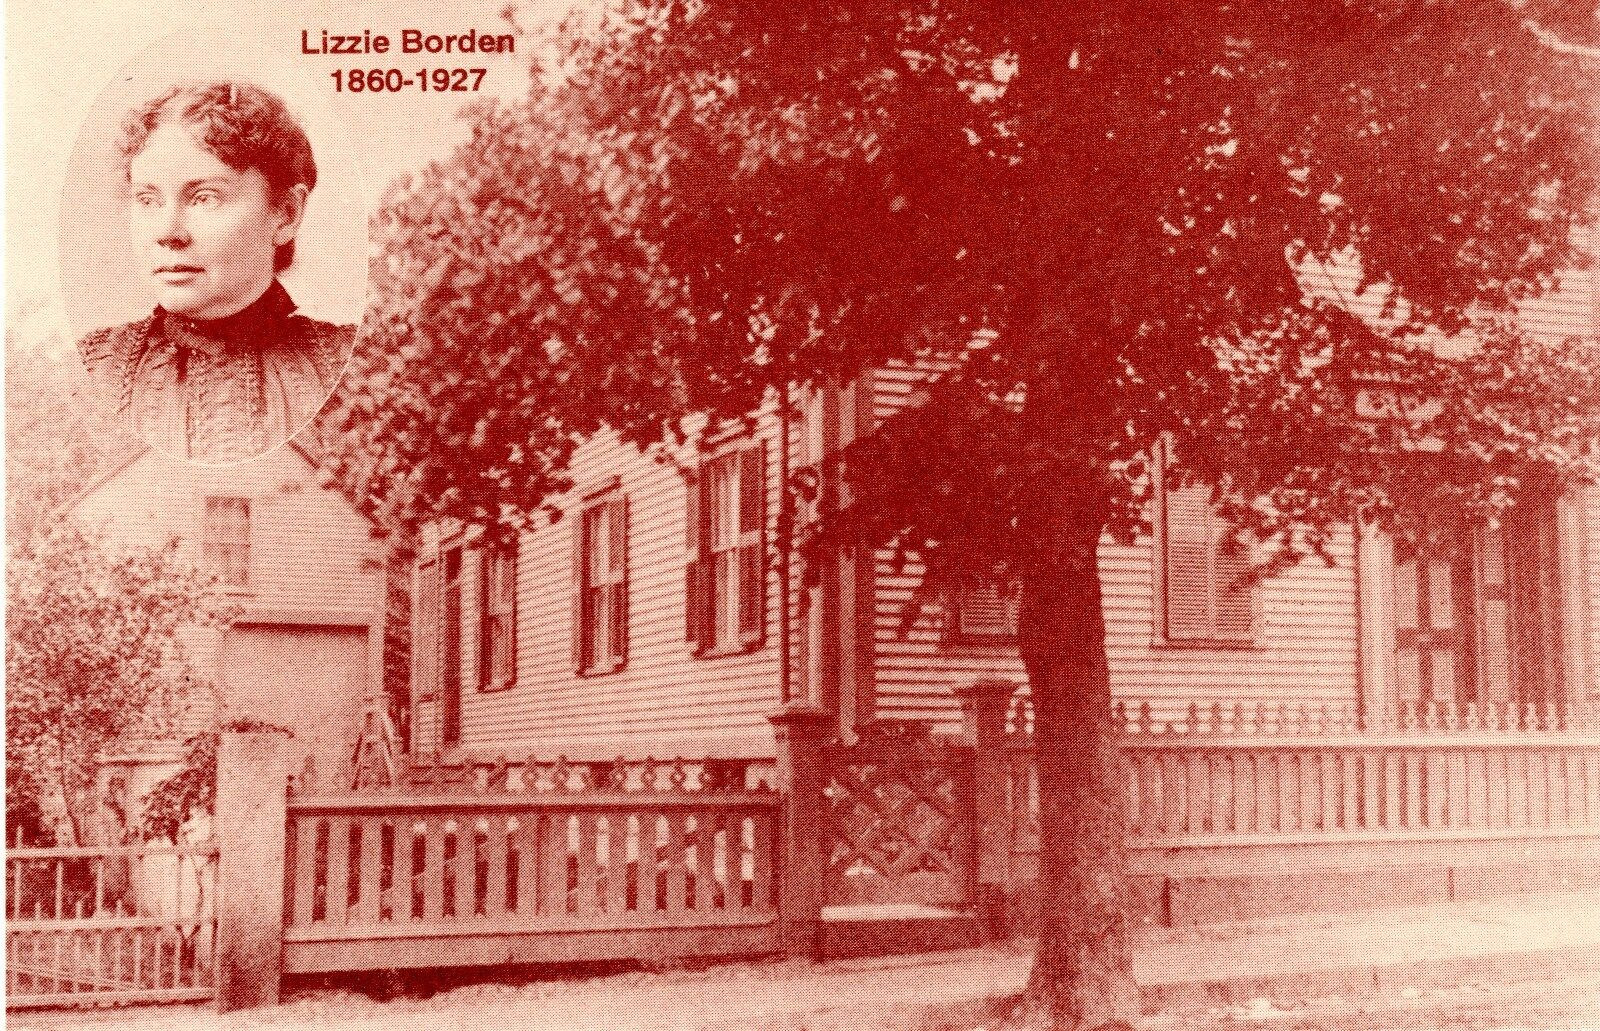 LIZZIE BORDEN POSTCARD-Aug.4th, 1892 Fall River Tragedy- *129 years ago